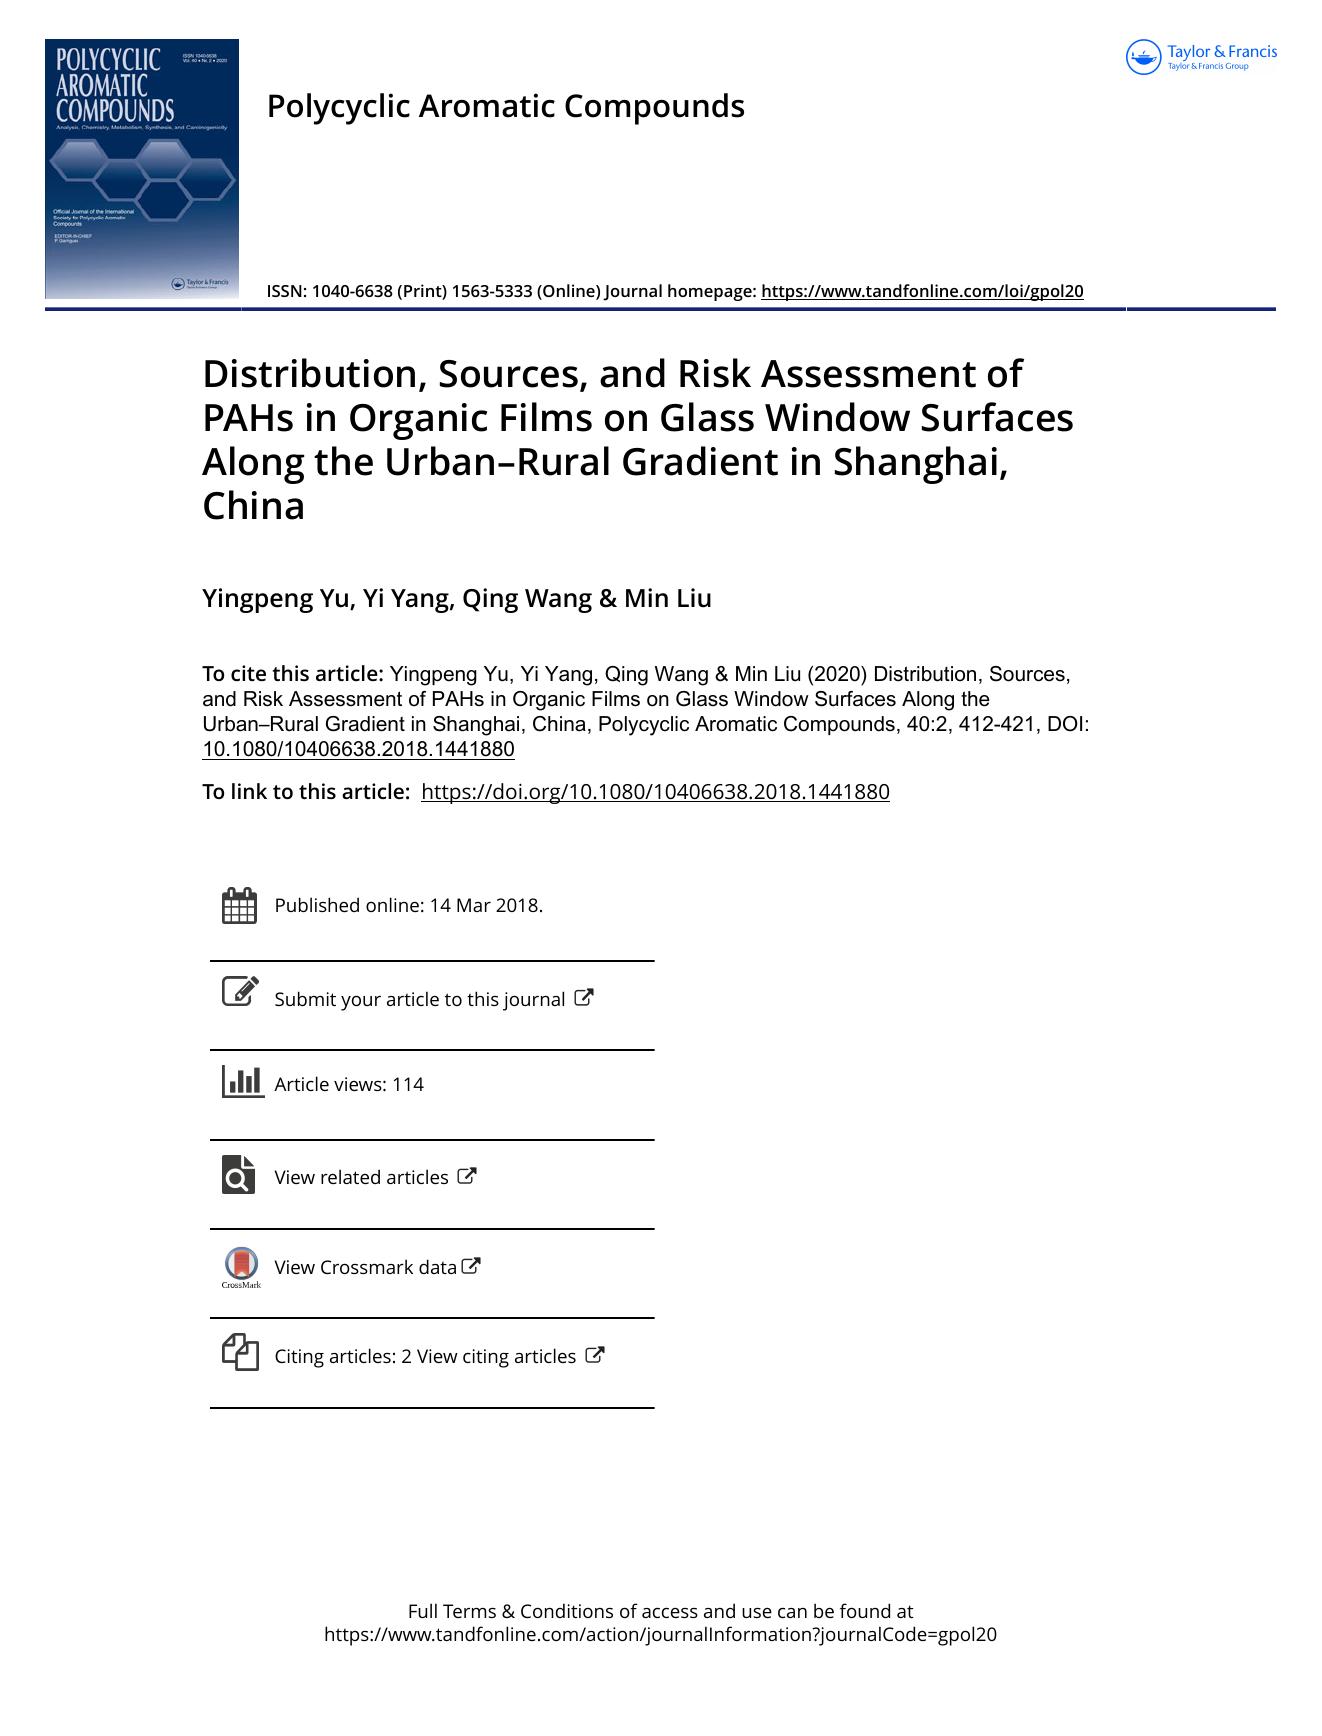 Distribution, Sources, and Risk Assessment of PAHs in Organic Films on Glass Window Surfaces Along the Urban--Rural Gradient in Shanghai, China by Yingpeng Yu & Yi Yang & Qing Wang & Min Liu